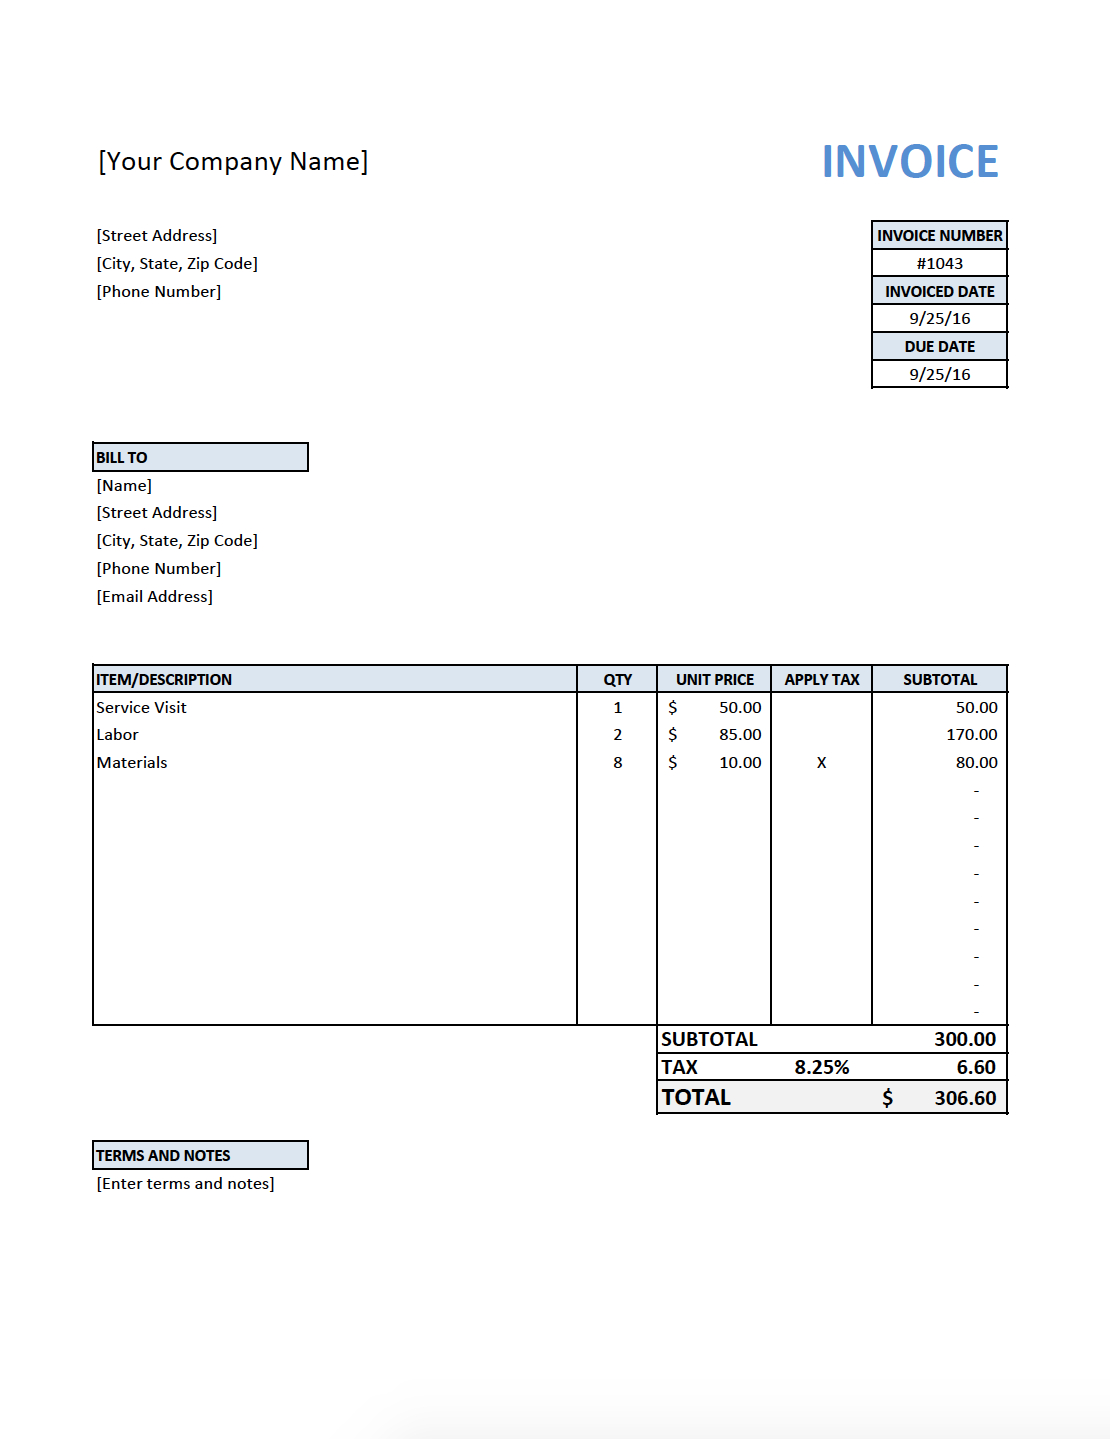 Free Invoice Template For Contractors Electrician Quickbooks regarding Free Roofing Invoice Template